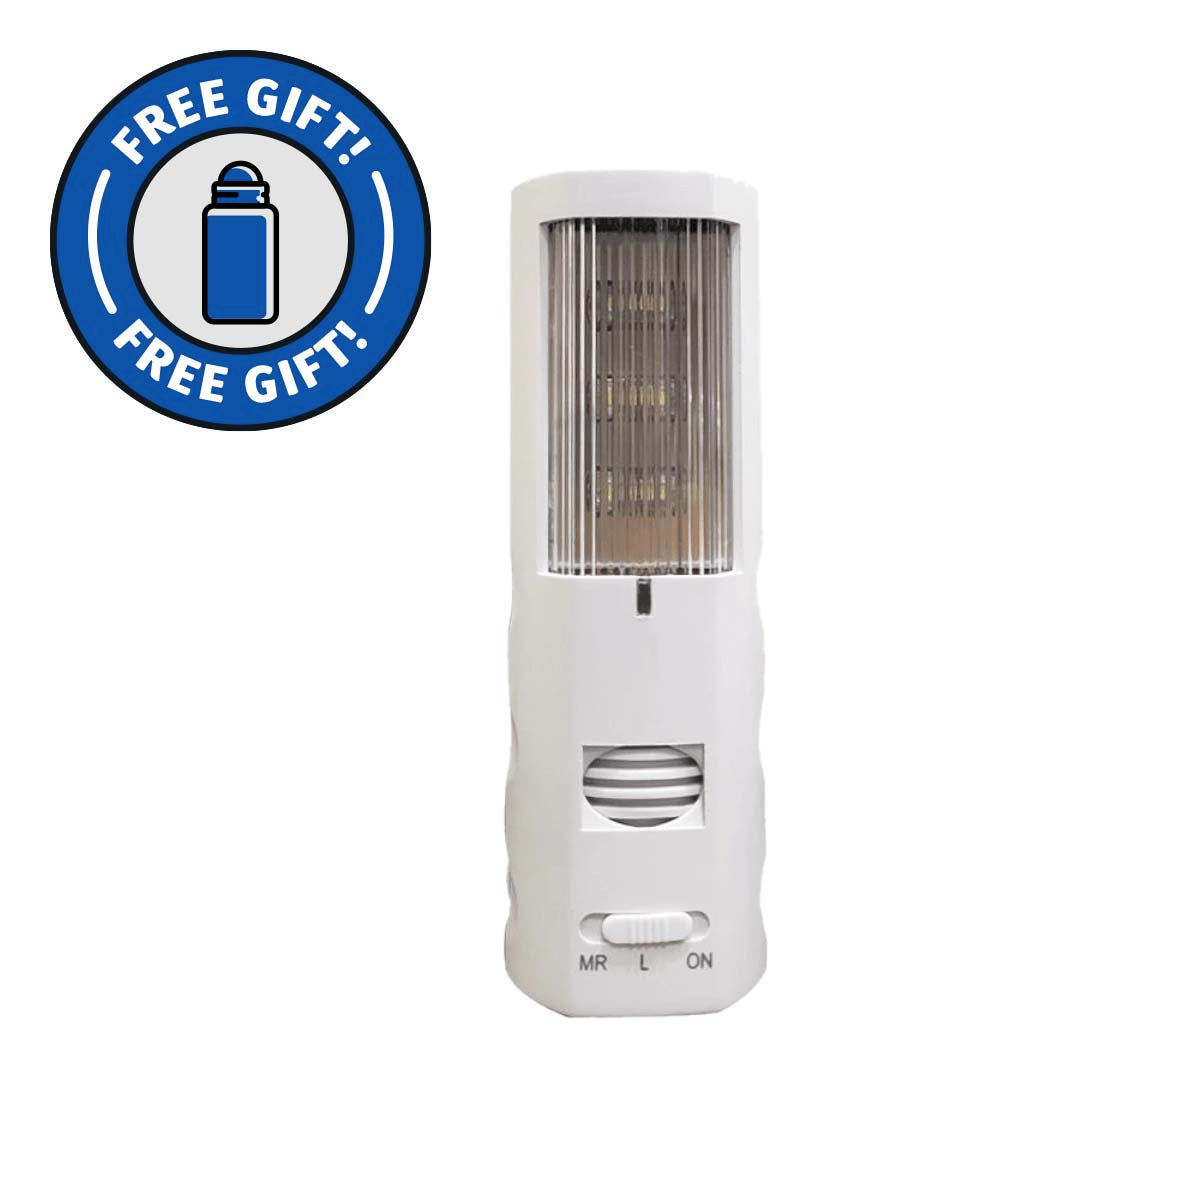 Soundteoh 2 In 1 Mosquito Repeller With LED Night Light 1611